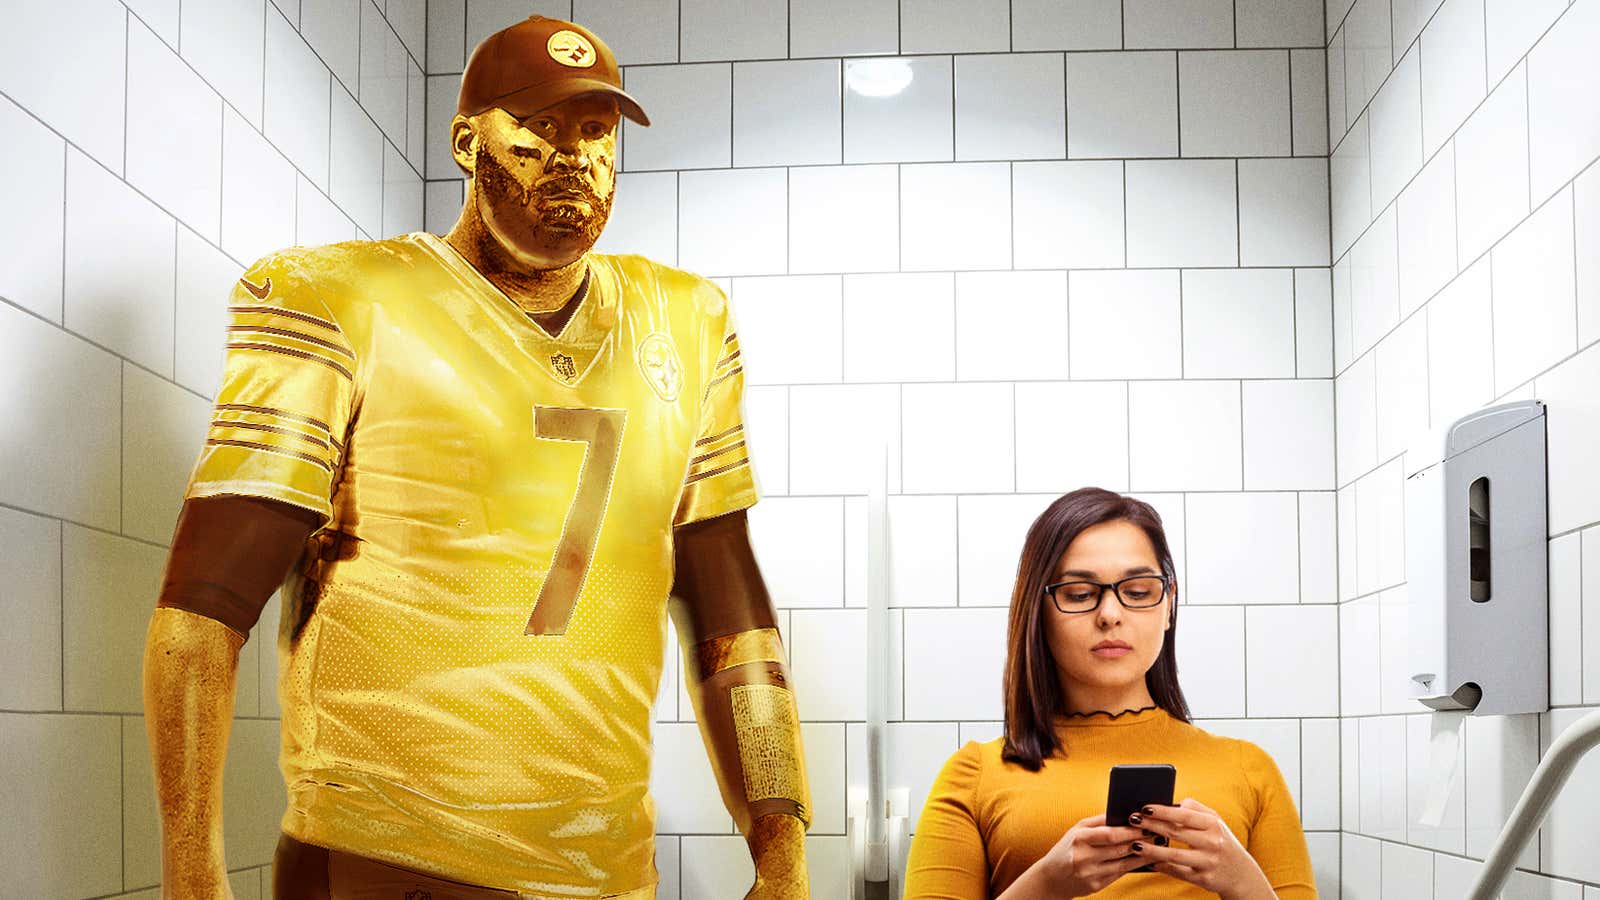 Image for Pittsburgh Honors Ben Roethlisberger With Commemorative Statue In Women’s Bathroom